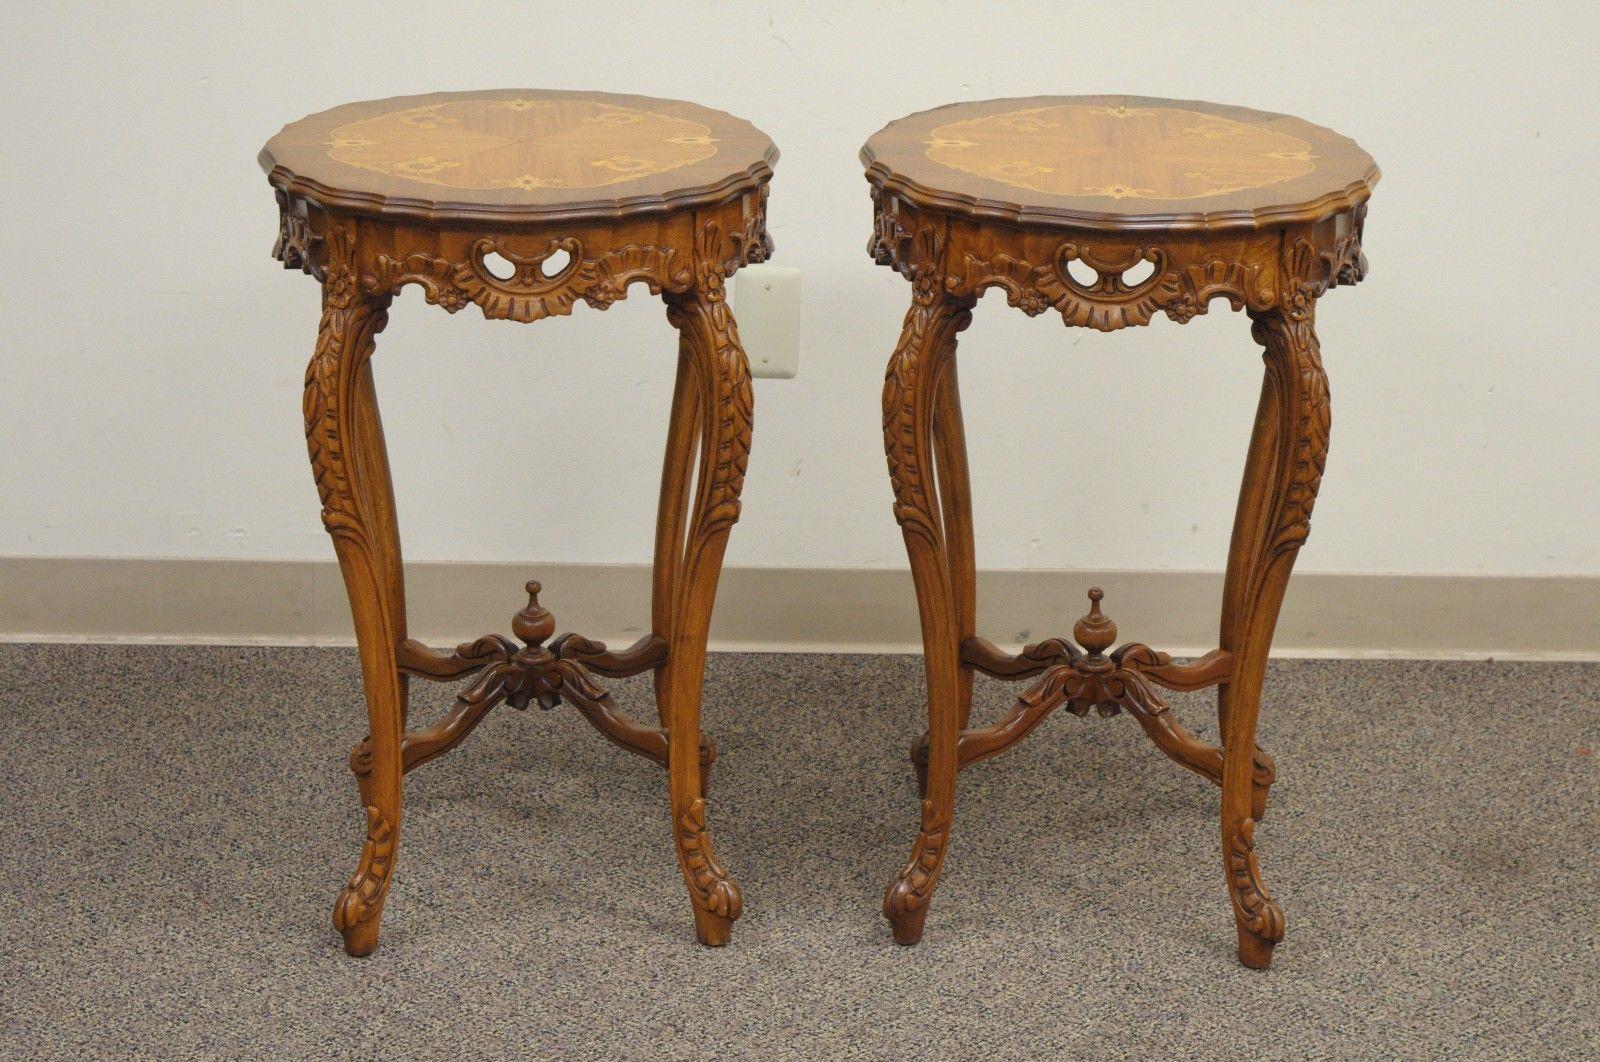 Pair of Antique French Louis XV style floral satinwood inlaid round end tables. Item features carved walnut bases, pierce carved skirts, satinwood inlaid floral tops, cabriole legs, stretcher bases with finials, and beautiful French form, early to